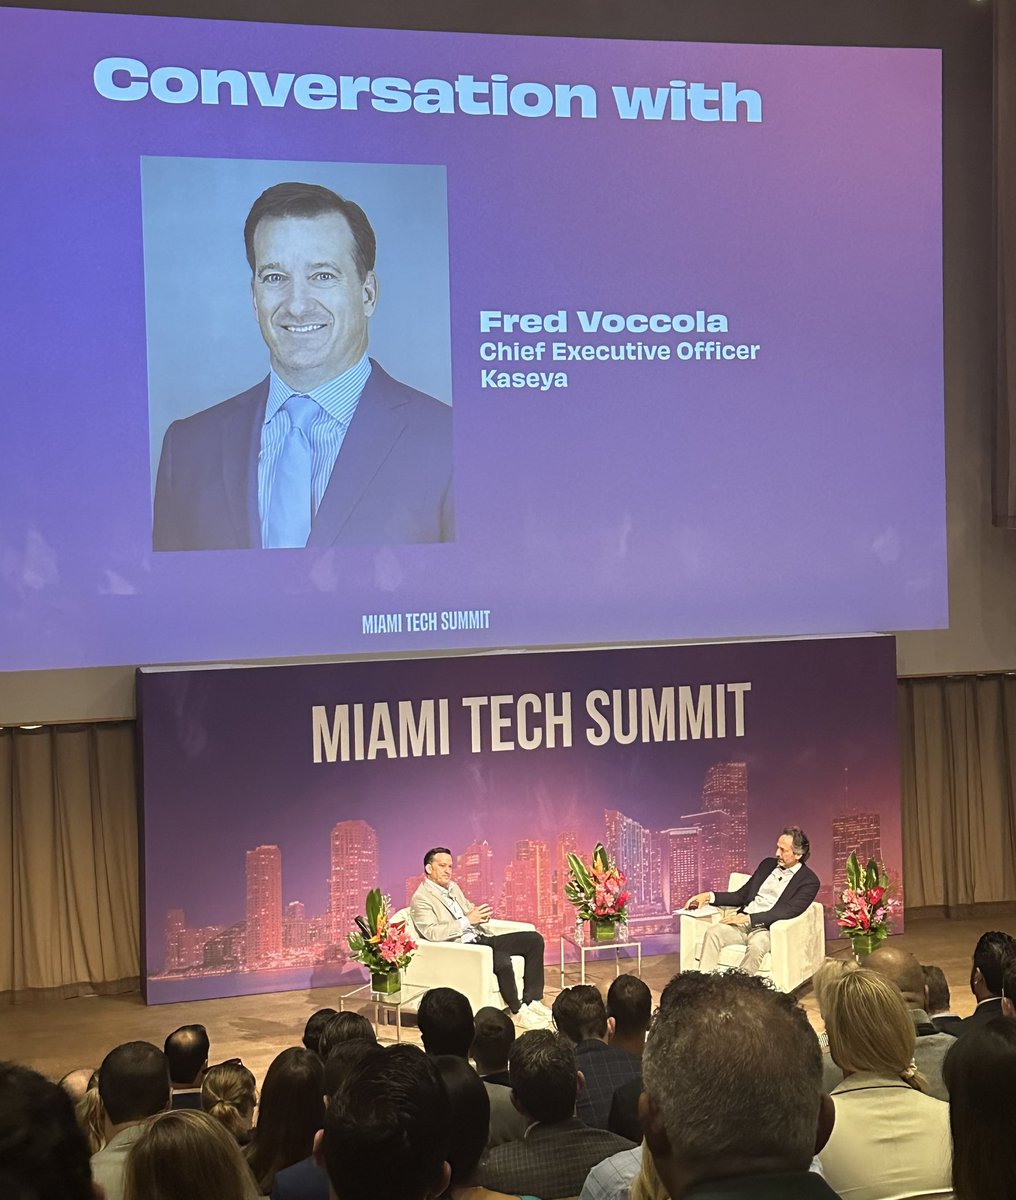 “90% of cyber attacks against businesses happen because they don’t have multi-factor authentication, so businesses absolutely need it” says @TheFredVoccola of @KaseyaCorp to @JustinSayfie at the @miami_summit #miamitechsummit